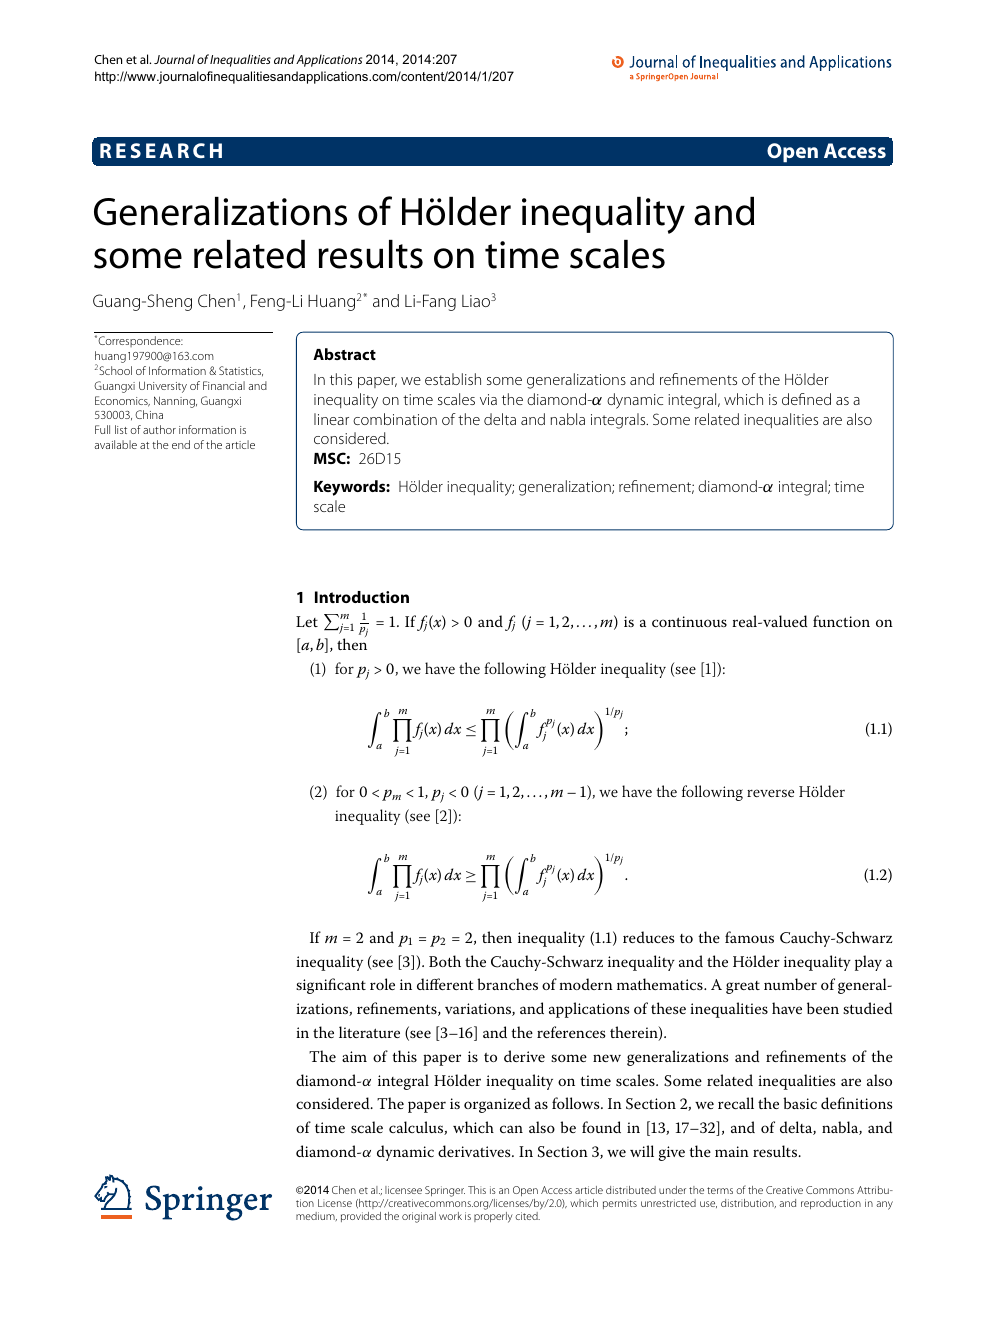 Generalizations Of Holder Inequality And Some Related Results On Time Scales Topic Of Research Paper In Mathematics Download Scholarly Article Pdf And Read For Free On Cyberleninka Open Science Hub